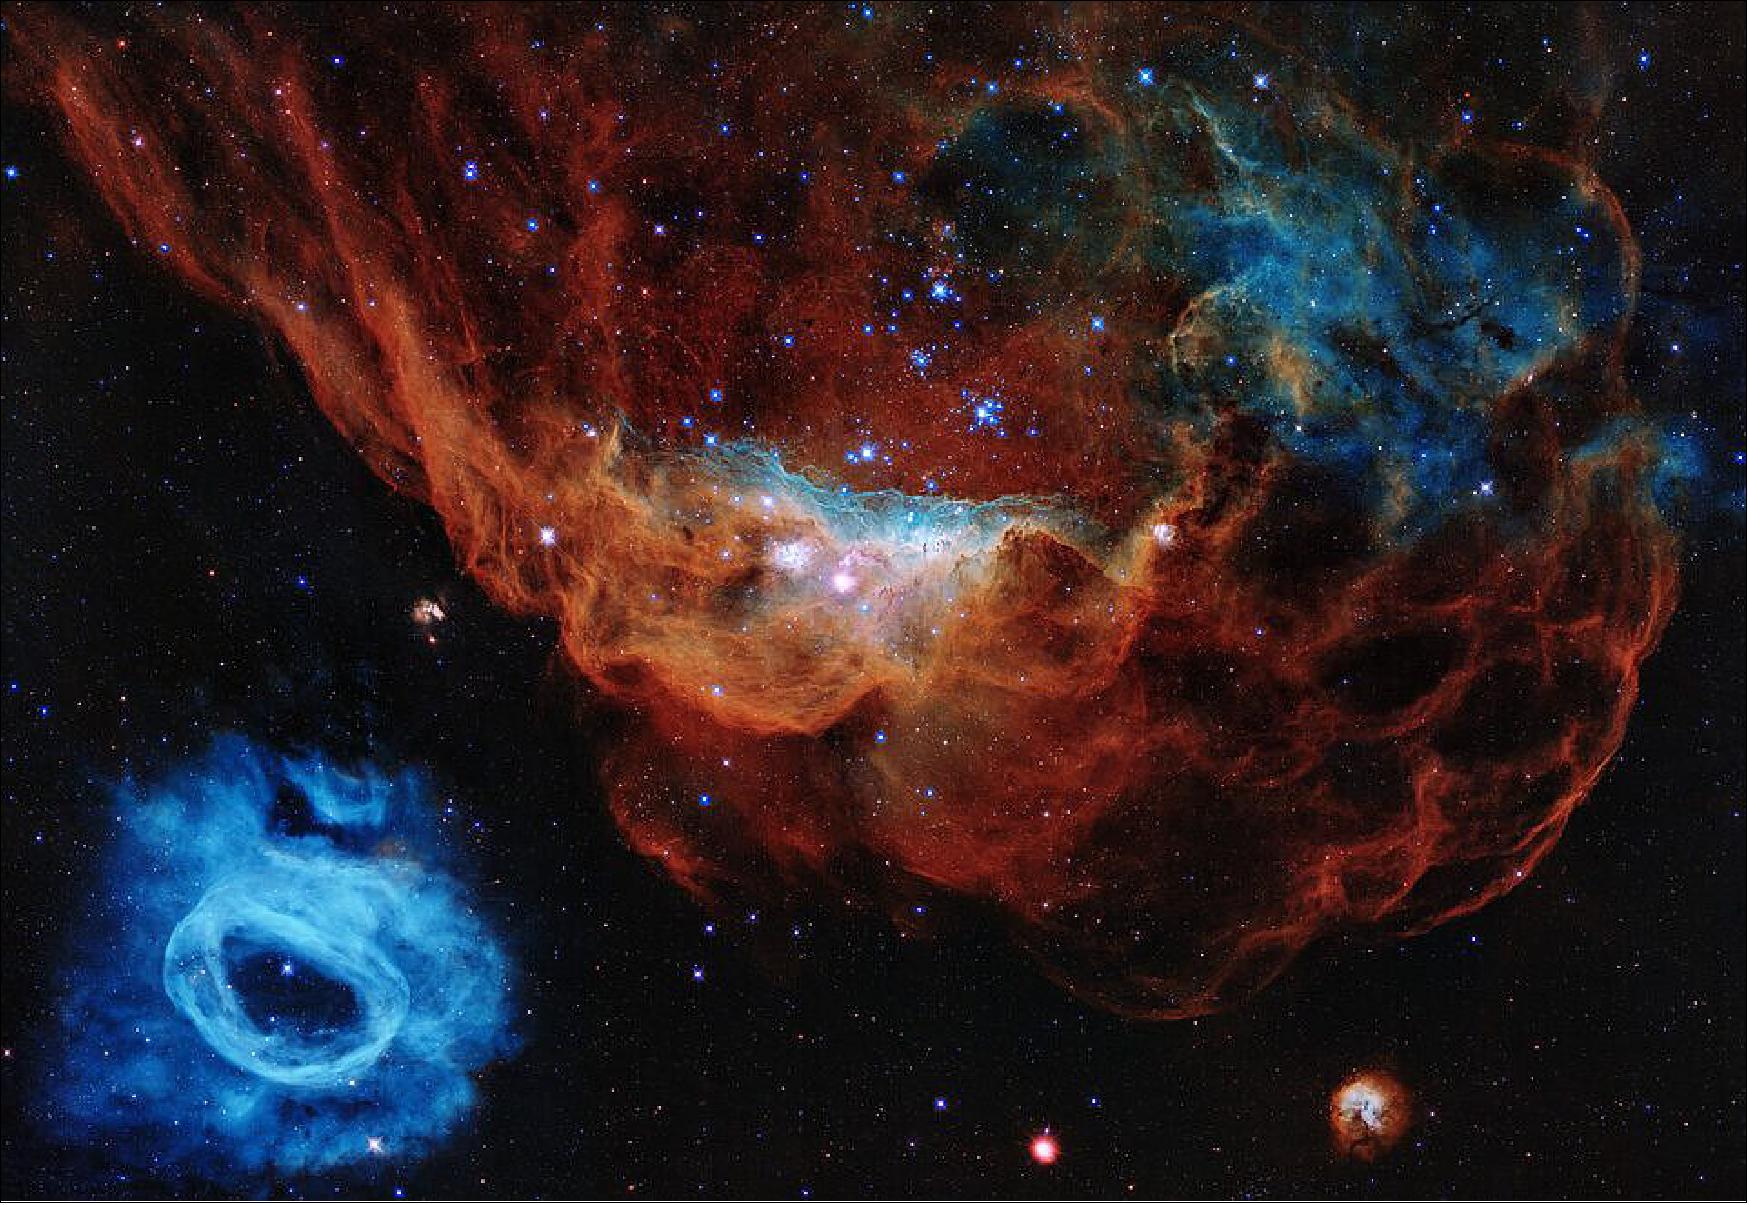 Figure 69: Hubble Space Telescope’s iconic images and scientific breakthroughs have redefined our view of the Universe. To commemorate three decades of scientific discoveries, this image is one of the most photogenic examples of the many turbulent stellar nurseries the telescope has observed during its 30-year lifetime. The portrait features the giant nebula NGC 2014 and its neighbor NGC 2020 which together form part of a vast star-forming region in the Large Magellanic Cloud, a satellite galaxy of the Milky Way, approximately 163 000 light-years away. The image is nicknamed the “Cosmic Reef” because it resembles an undersea world (image credit: NASA, ESA, and STScI; CC BY 4.0)